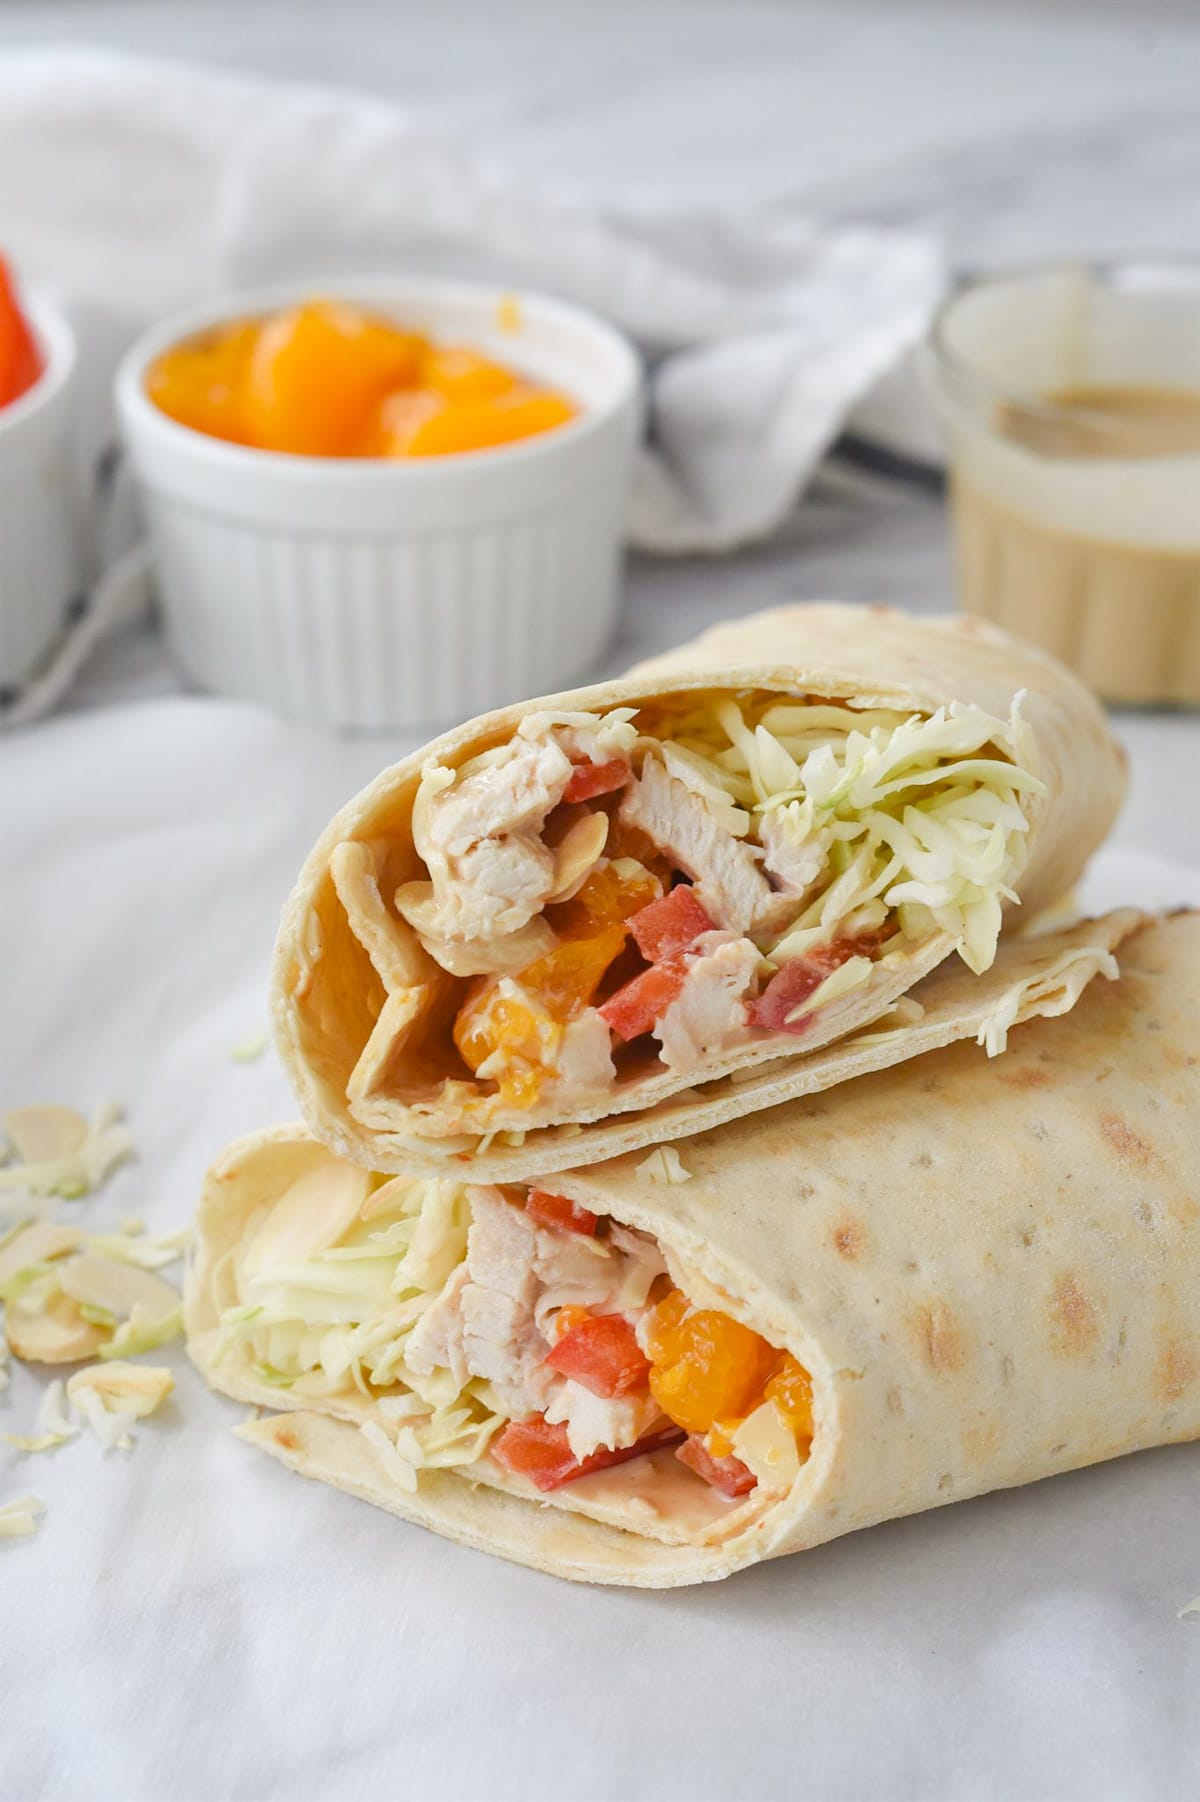 A wrap with chicken and red peppers cut in half